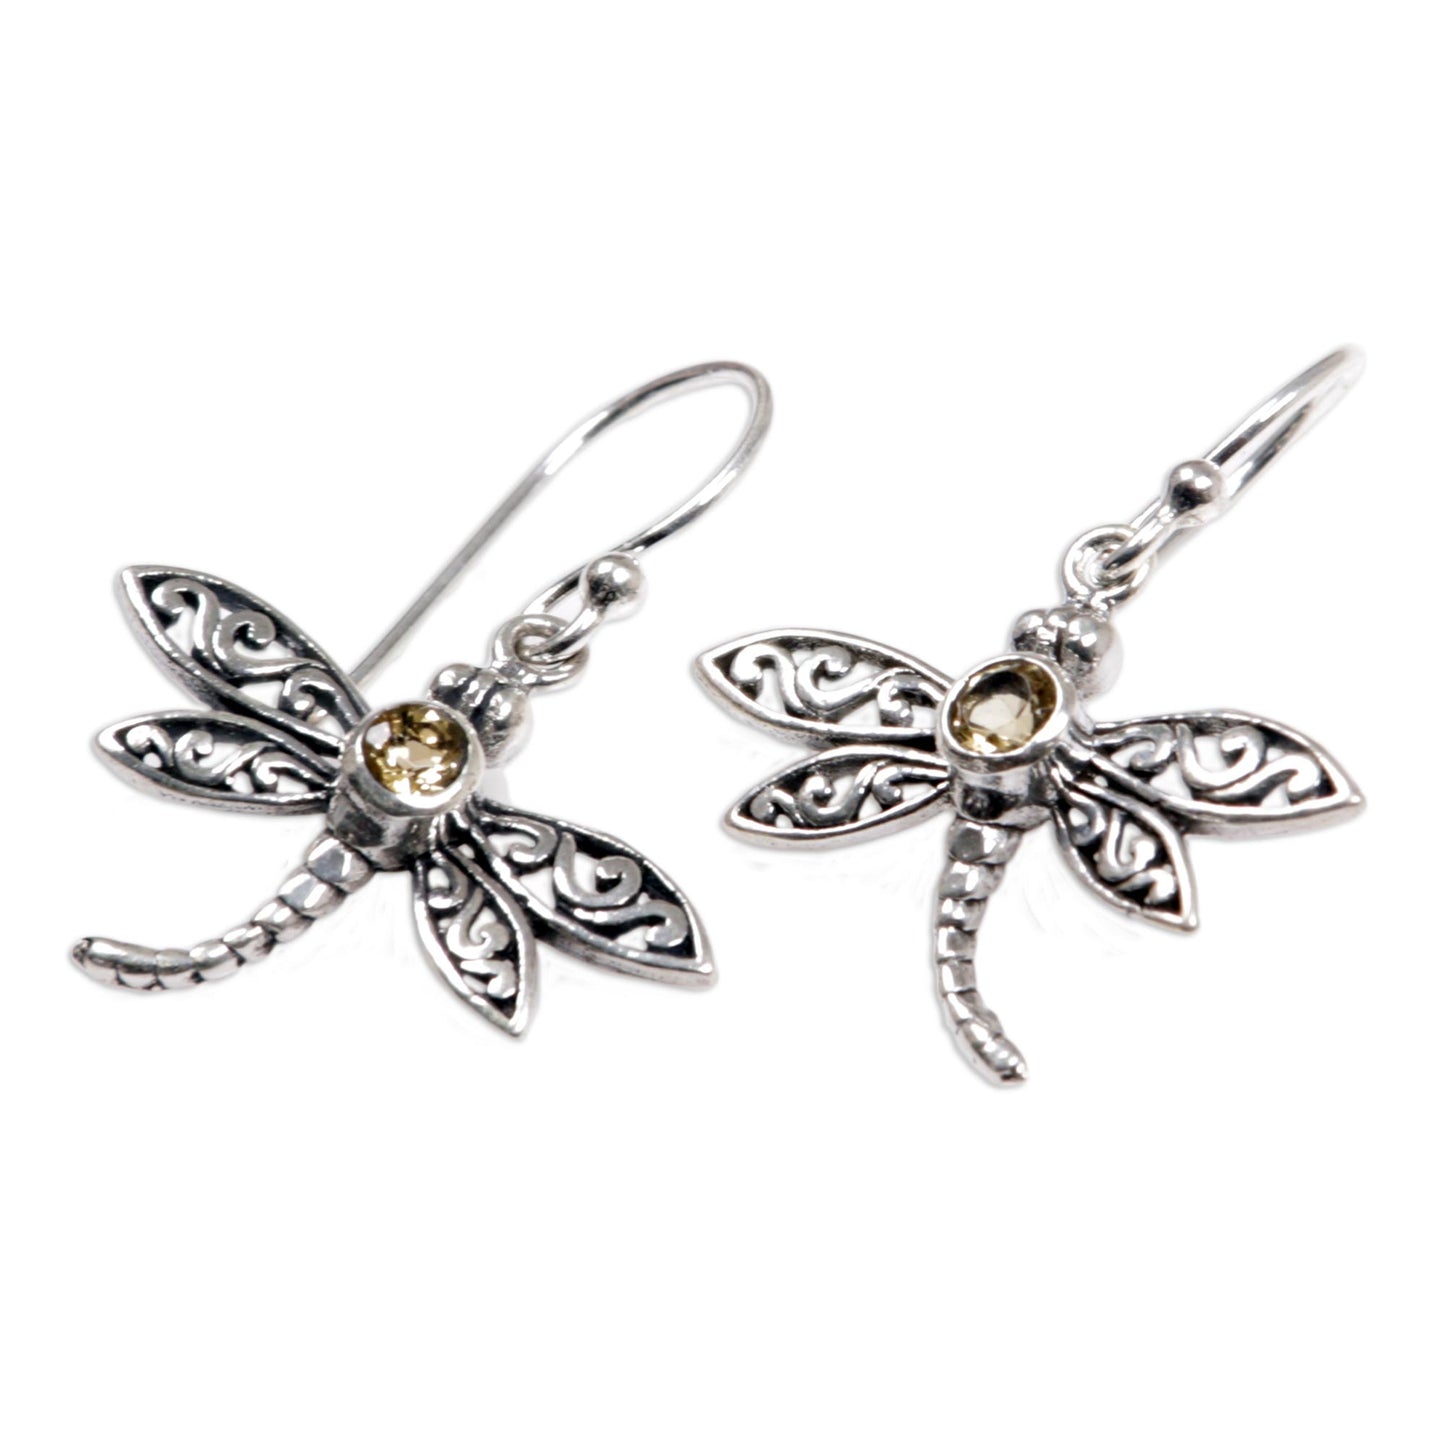 Enchanted Dragonfly Sterling Silver Earrings